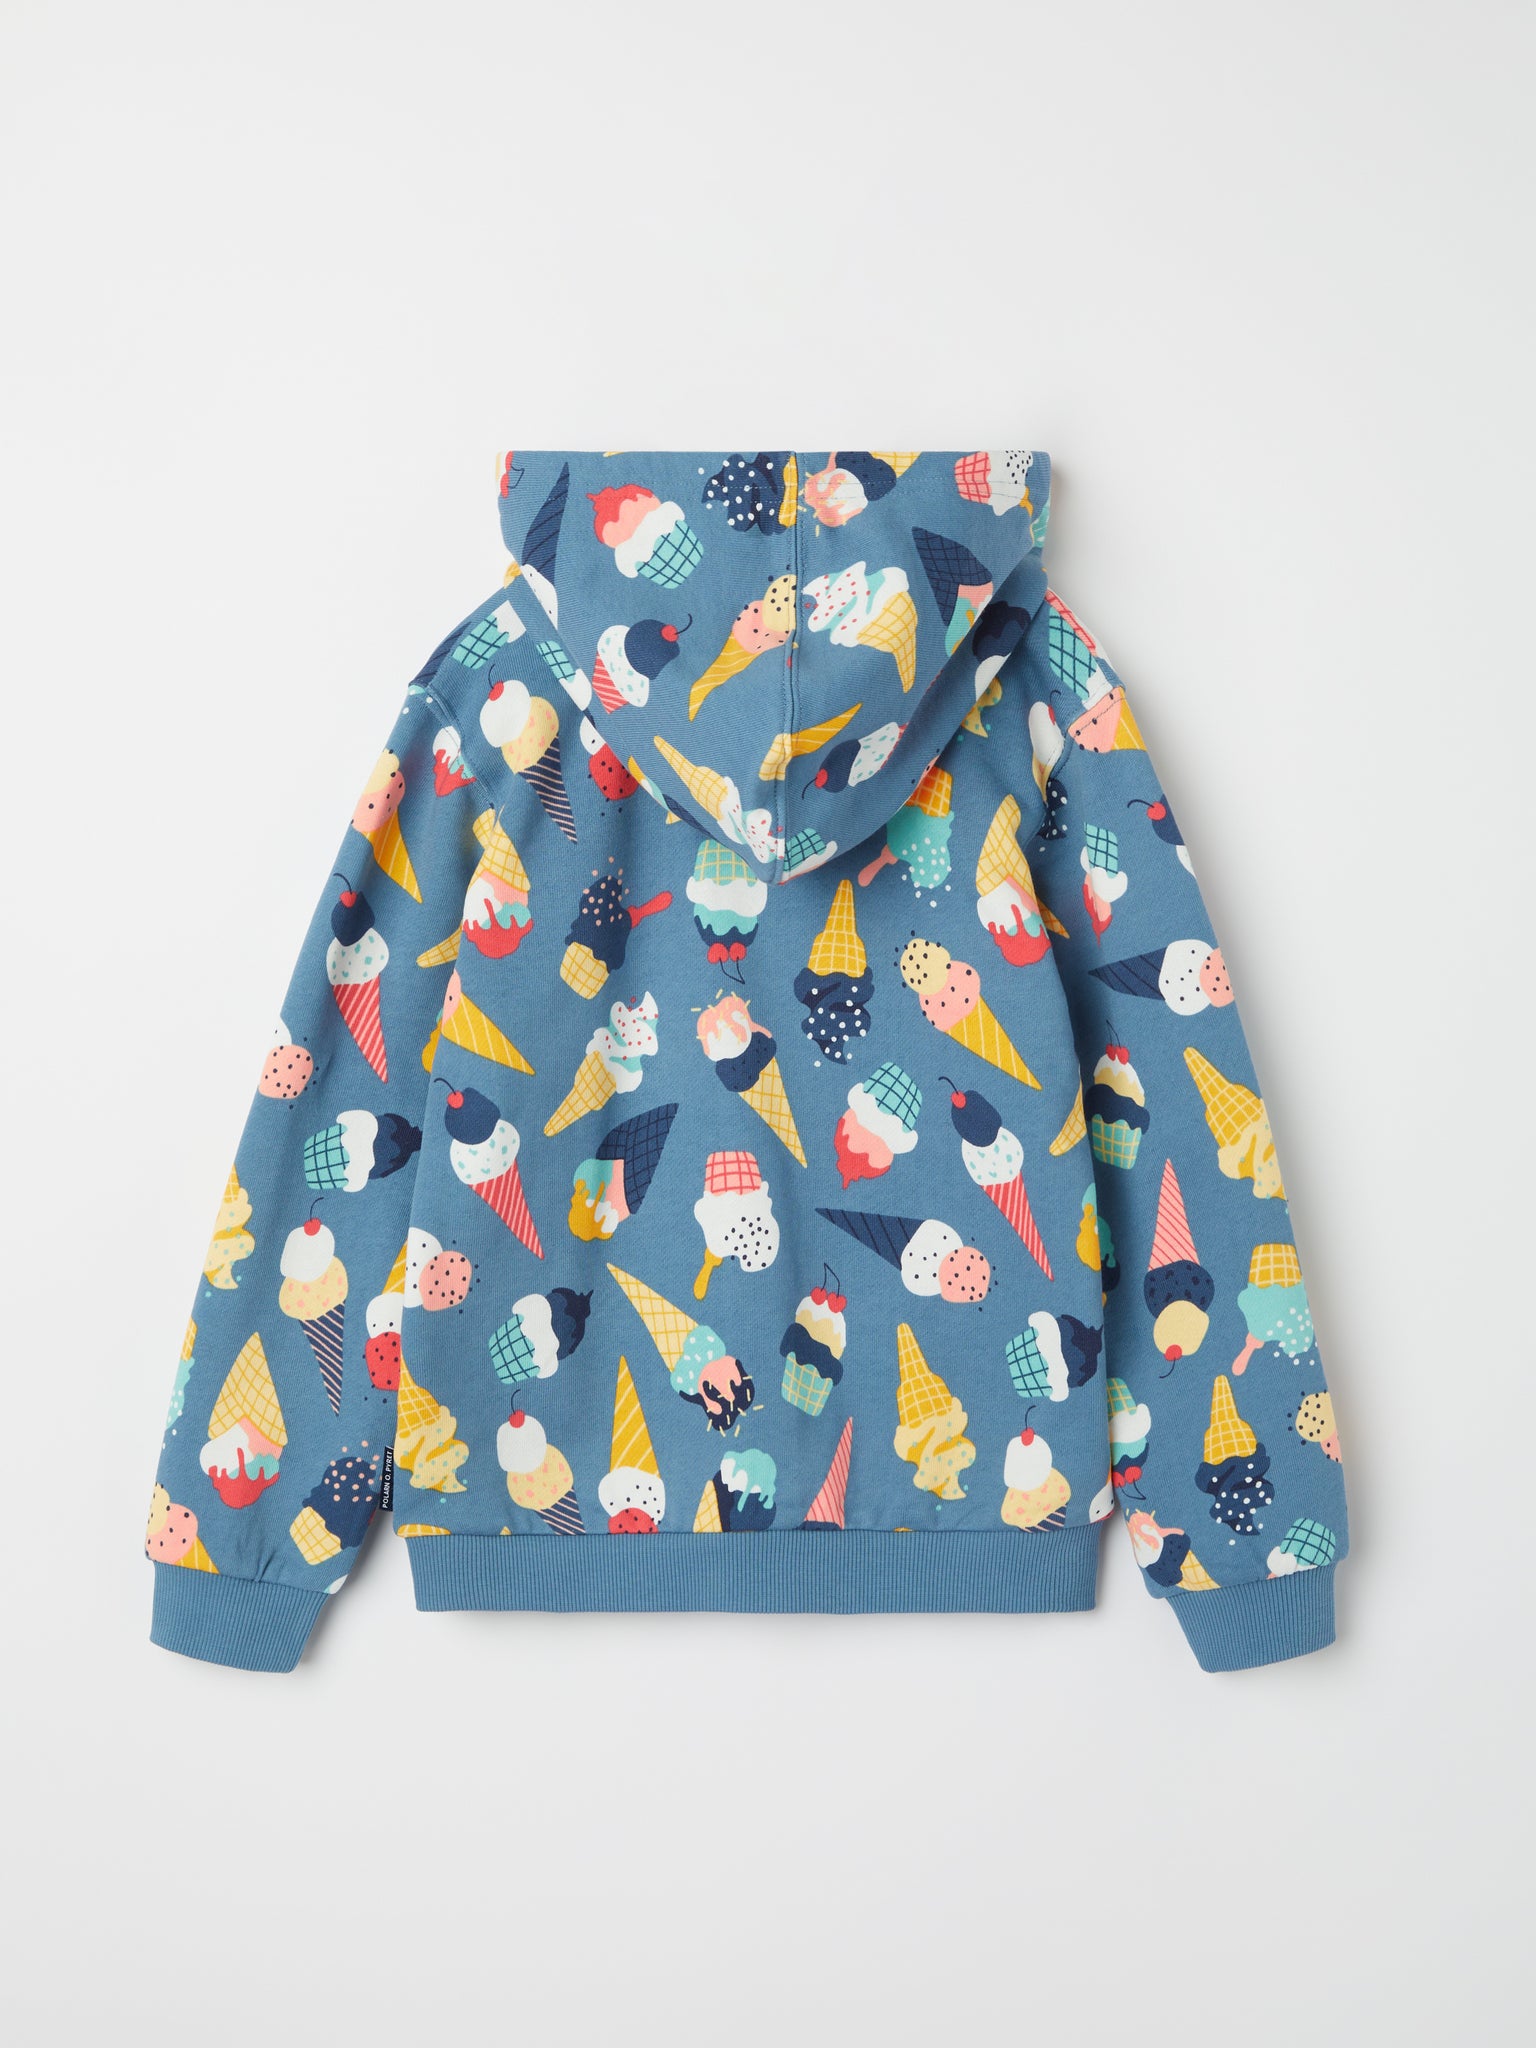 Ice cream Print Kids Hoodie from the Polarn O. Pyret kidswear collection. Ethically produced kids clothing.